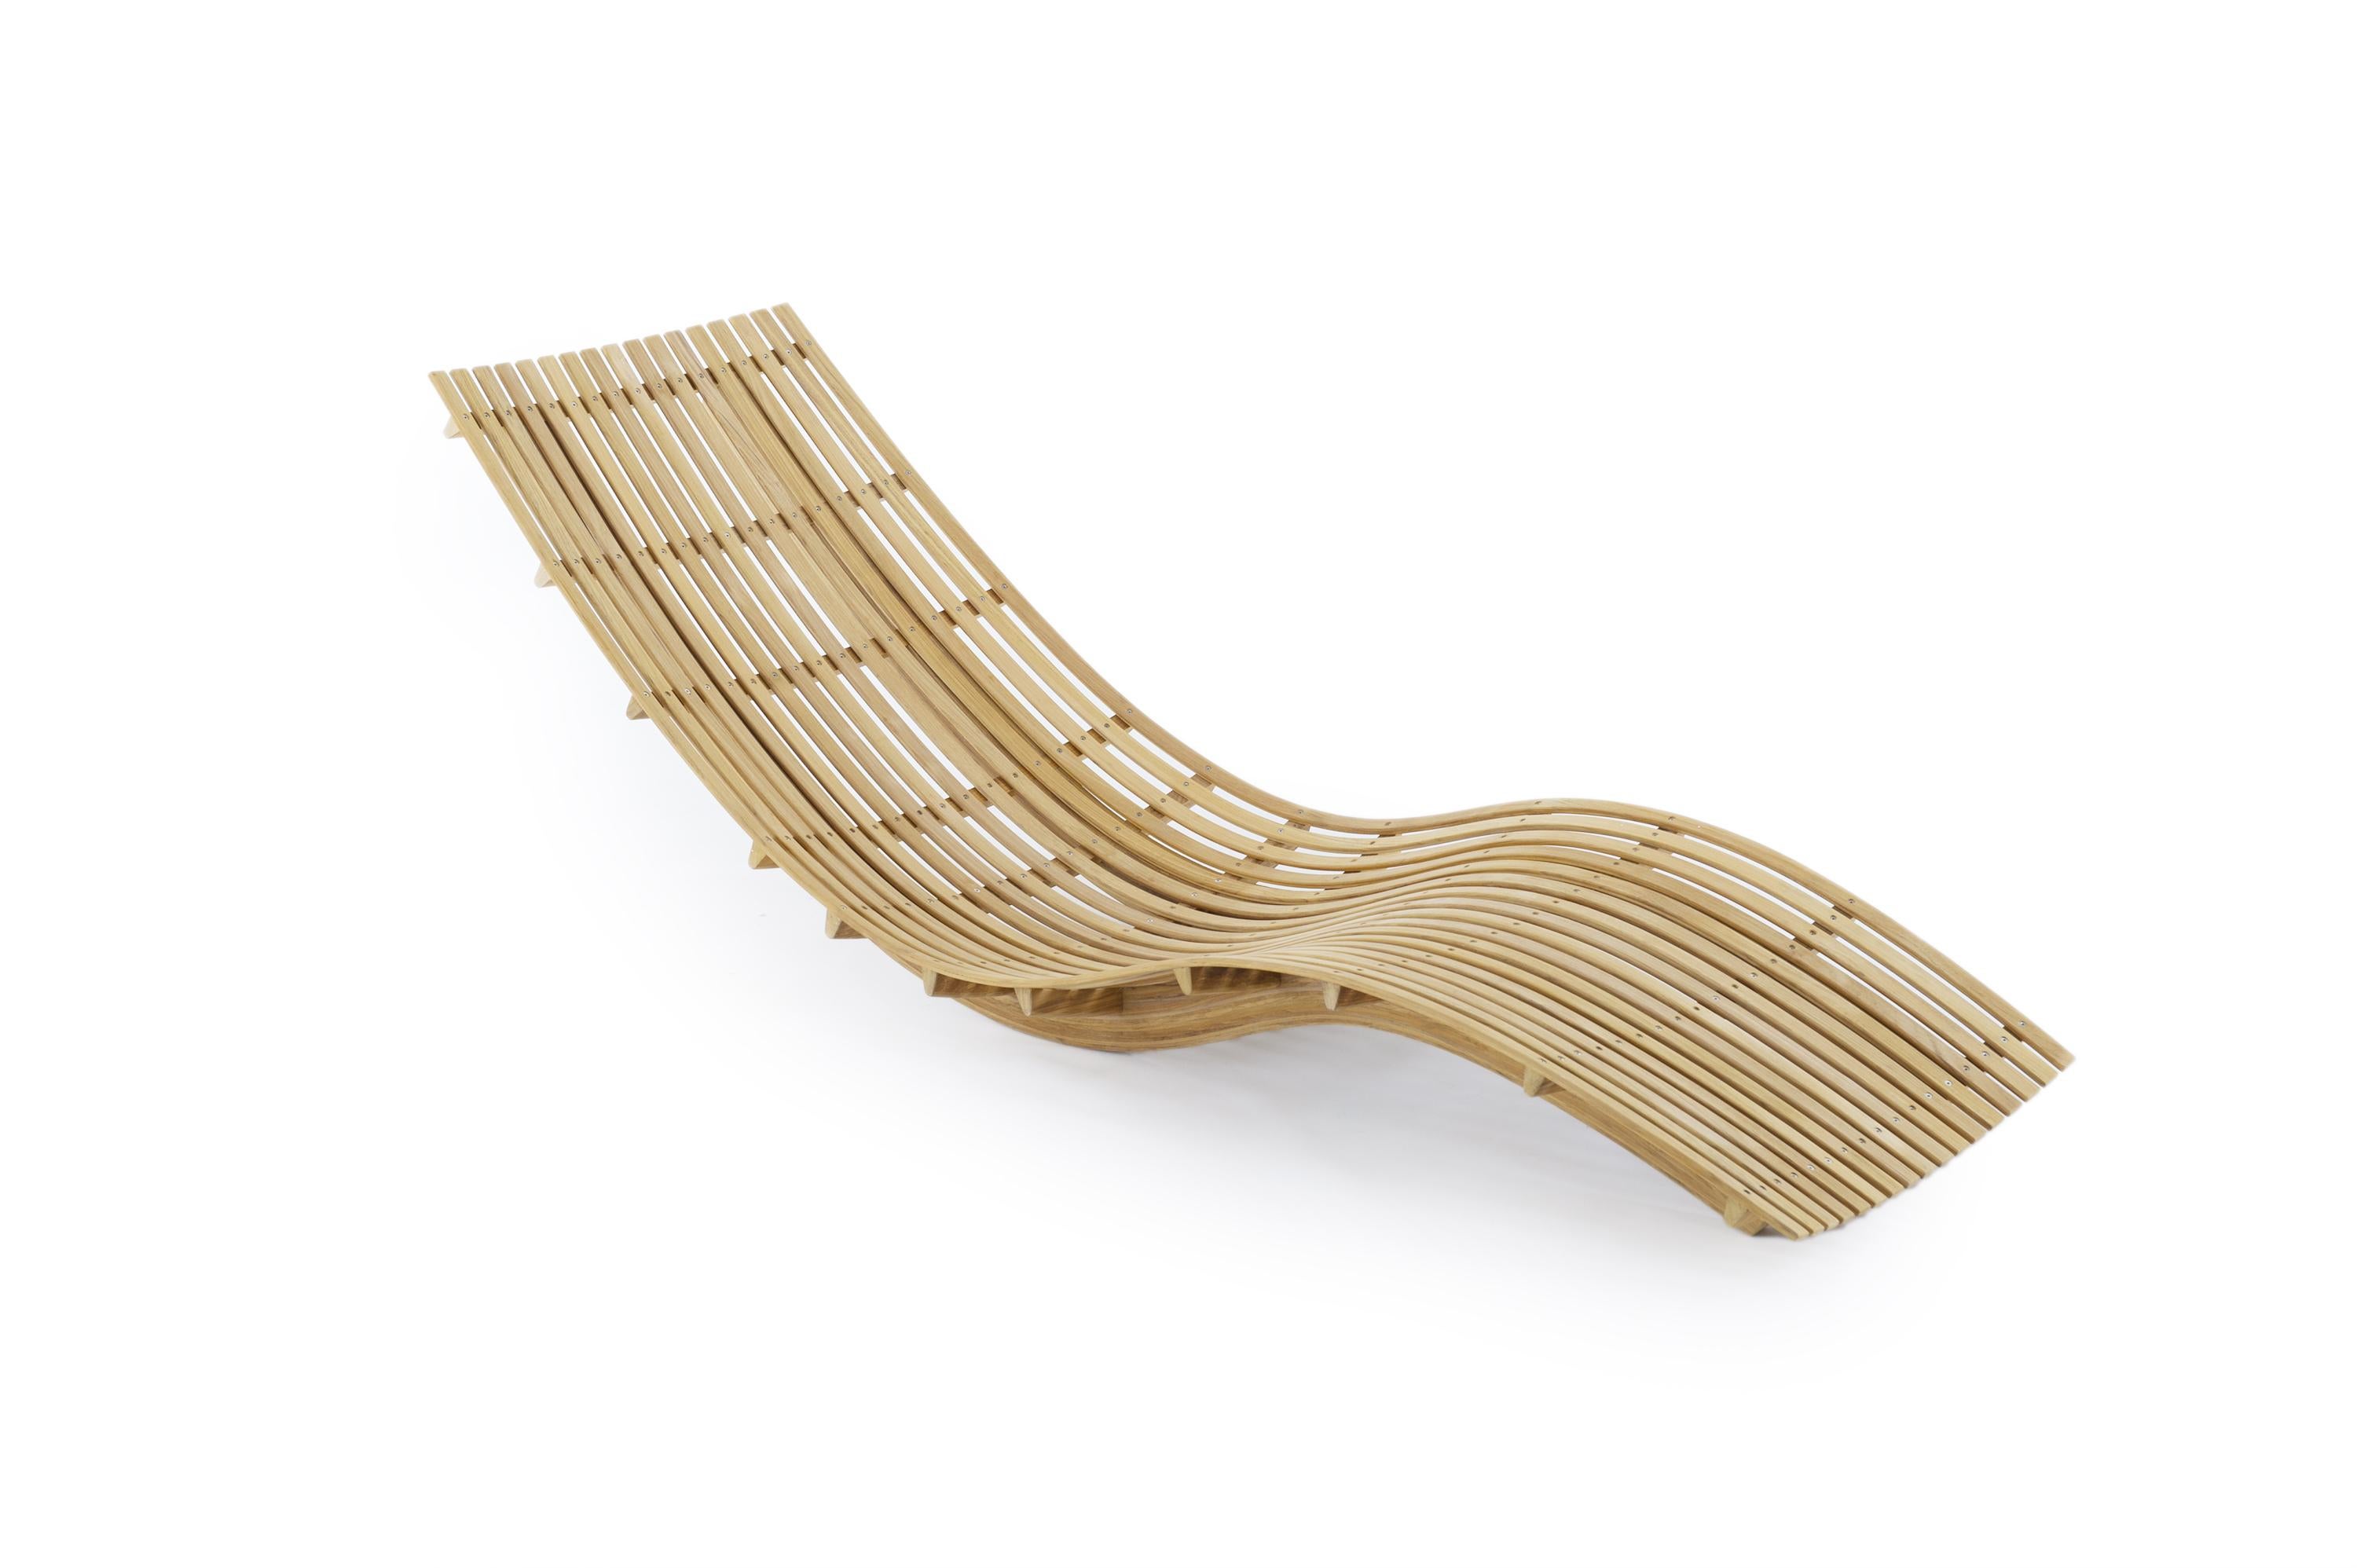 The skilful crafting of thermo-curved teak wood slats gives a sinuous and welcoming look to the elements of the Swing line. The chaise-longue, with its soft lines and ergonomic shape, is ideal for moments of relaxation.

Cushion and support not